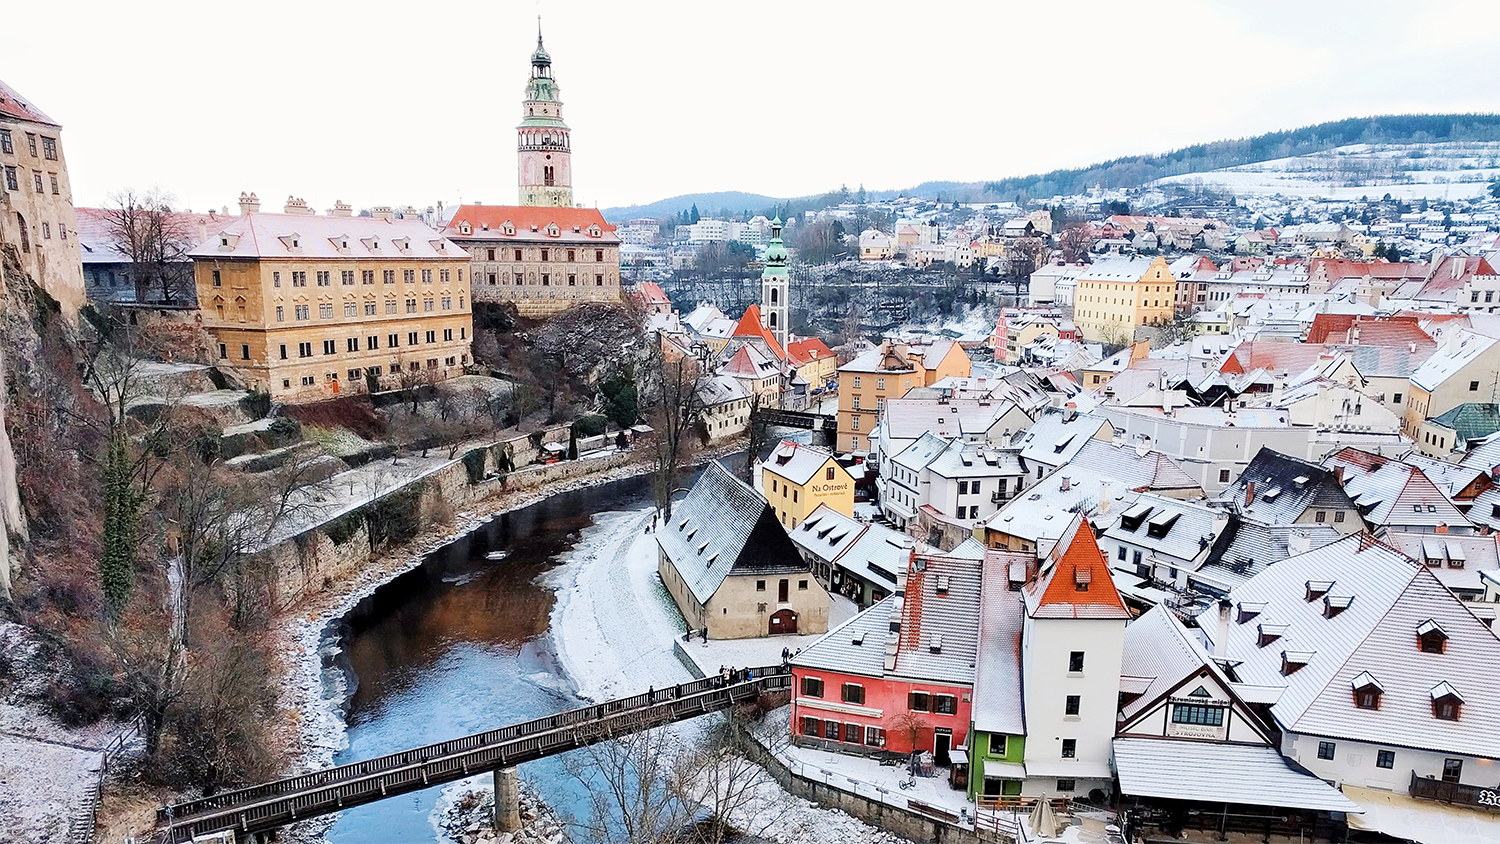 View of the UNESCO town in South Bohemia, Cesky Krumlov